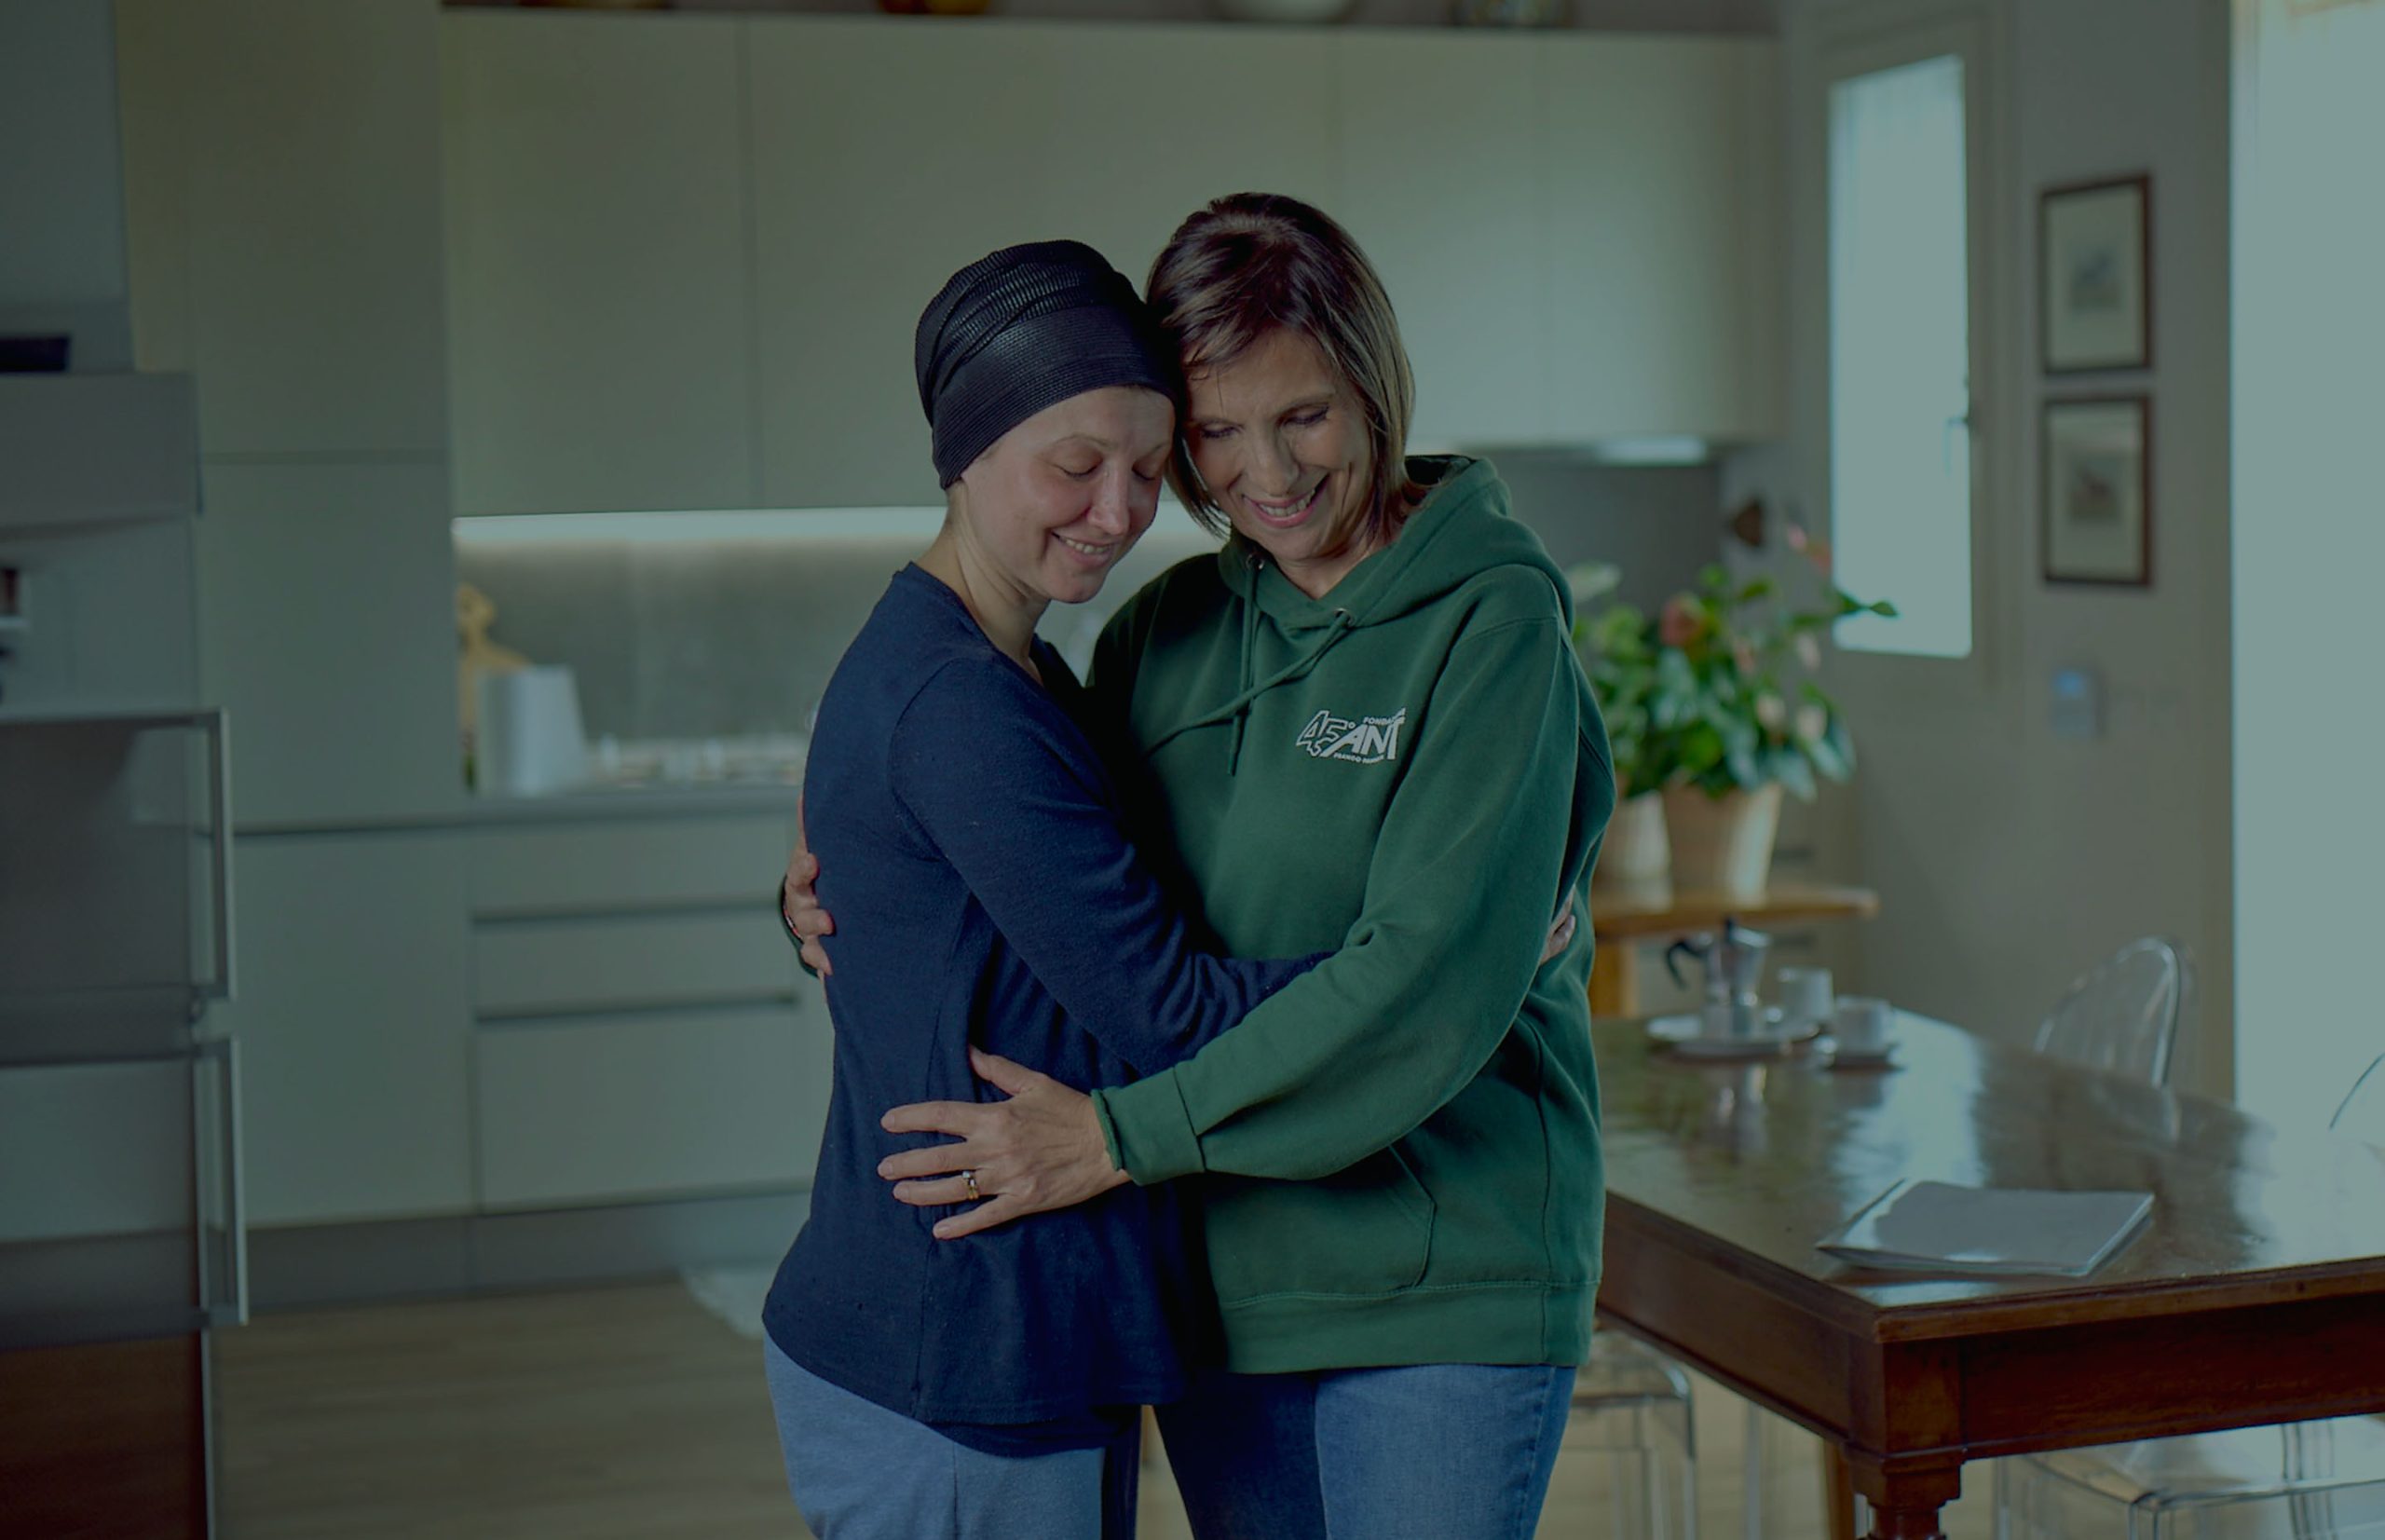 Two people hug in a kitchen—one in a beanie, the other in a green hoodie—sharing a warm moment.